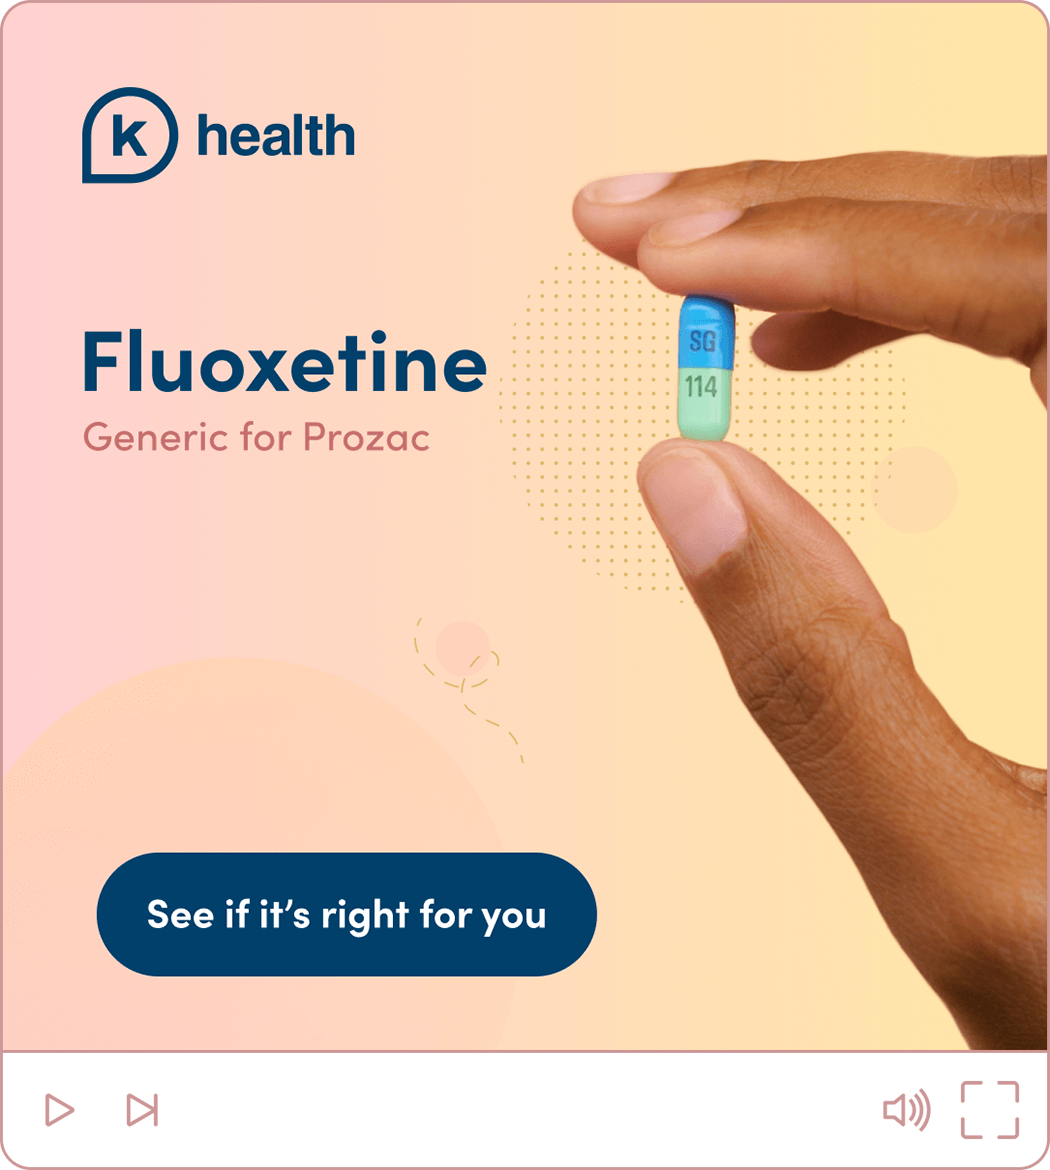 Ad for fluoxetine featuring a hand holding a pill, the medication name, and the K Health logo